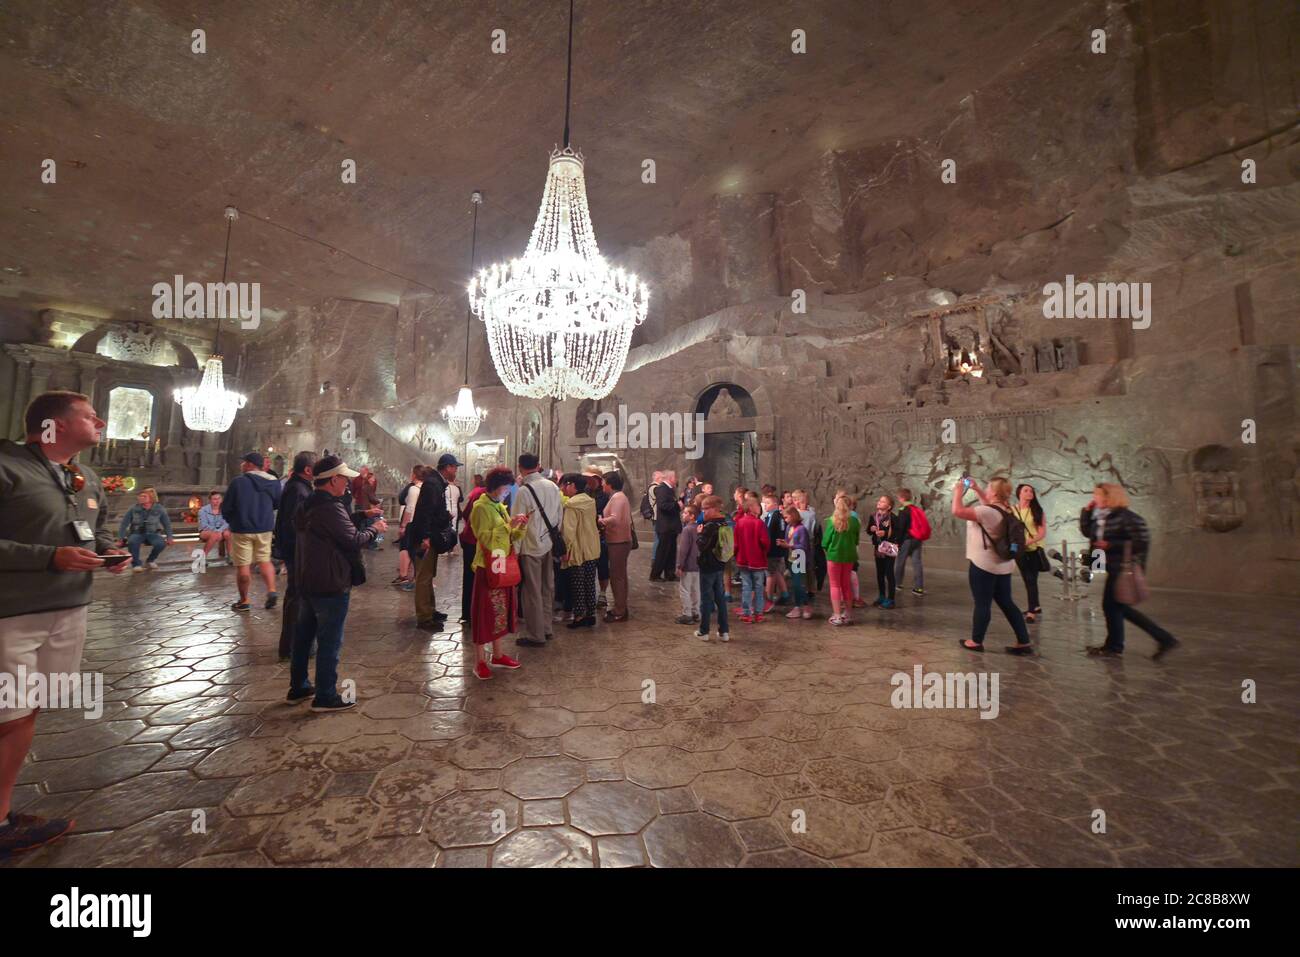 Wieliczka Salt Mine / Poland - June 10, 2019: large number of tourists visiting the interior of the famous salt mines decorated as a palace Stock Photo